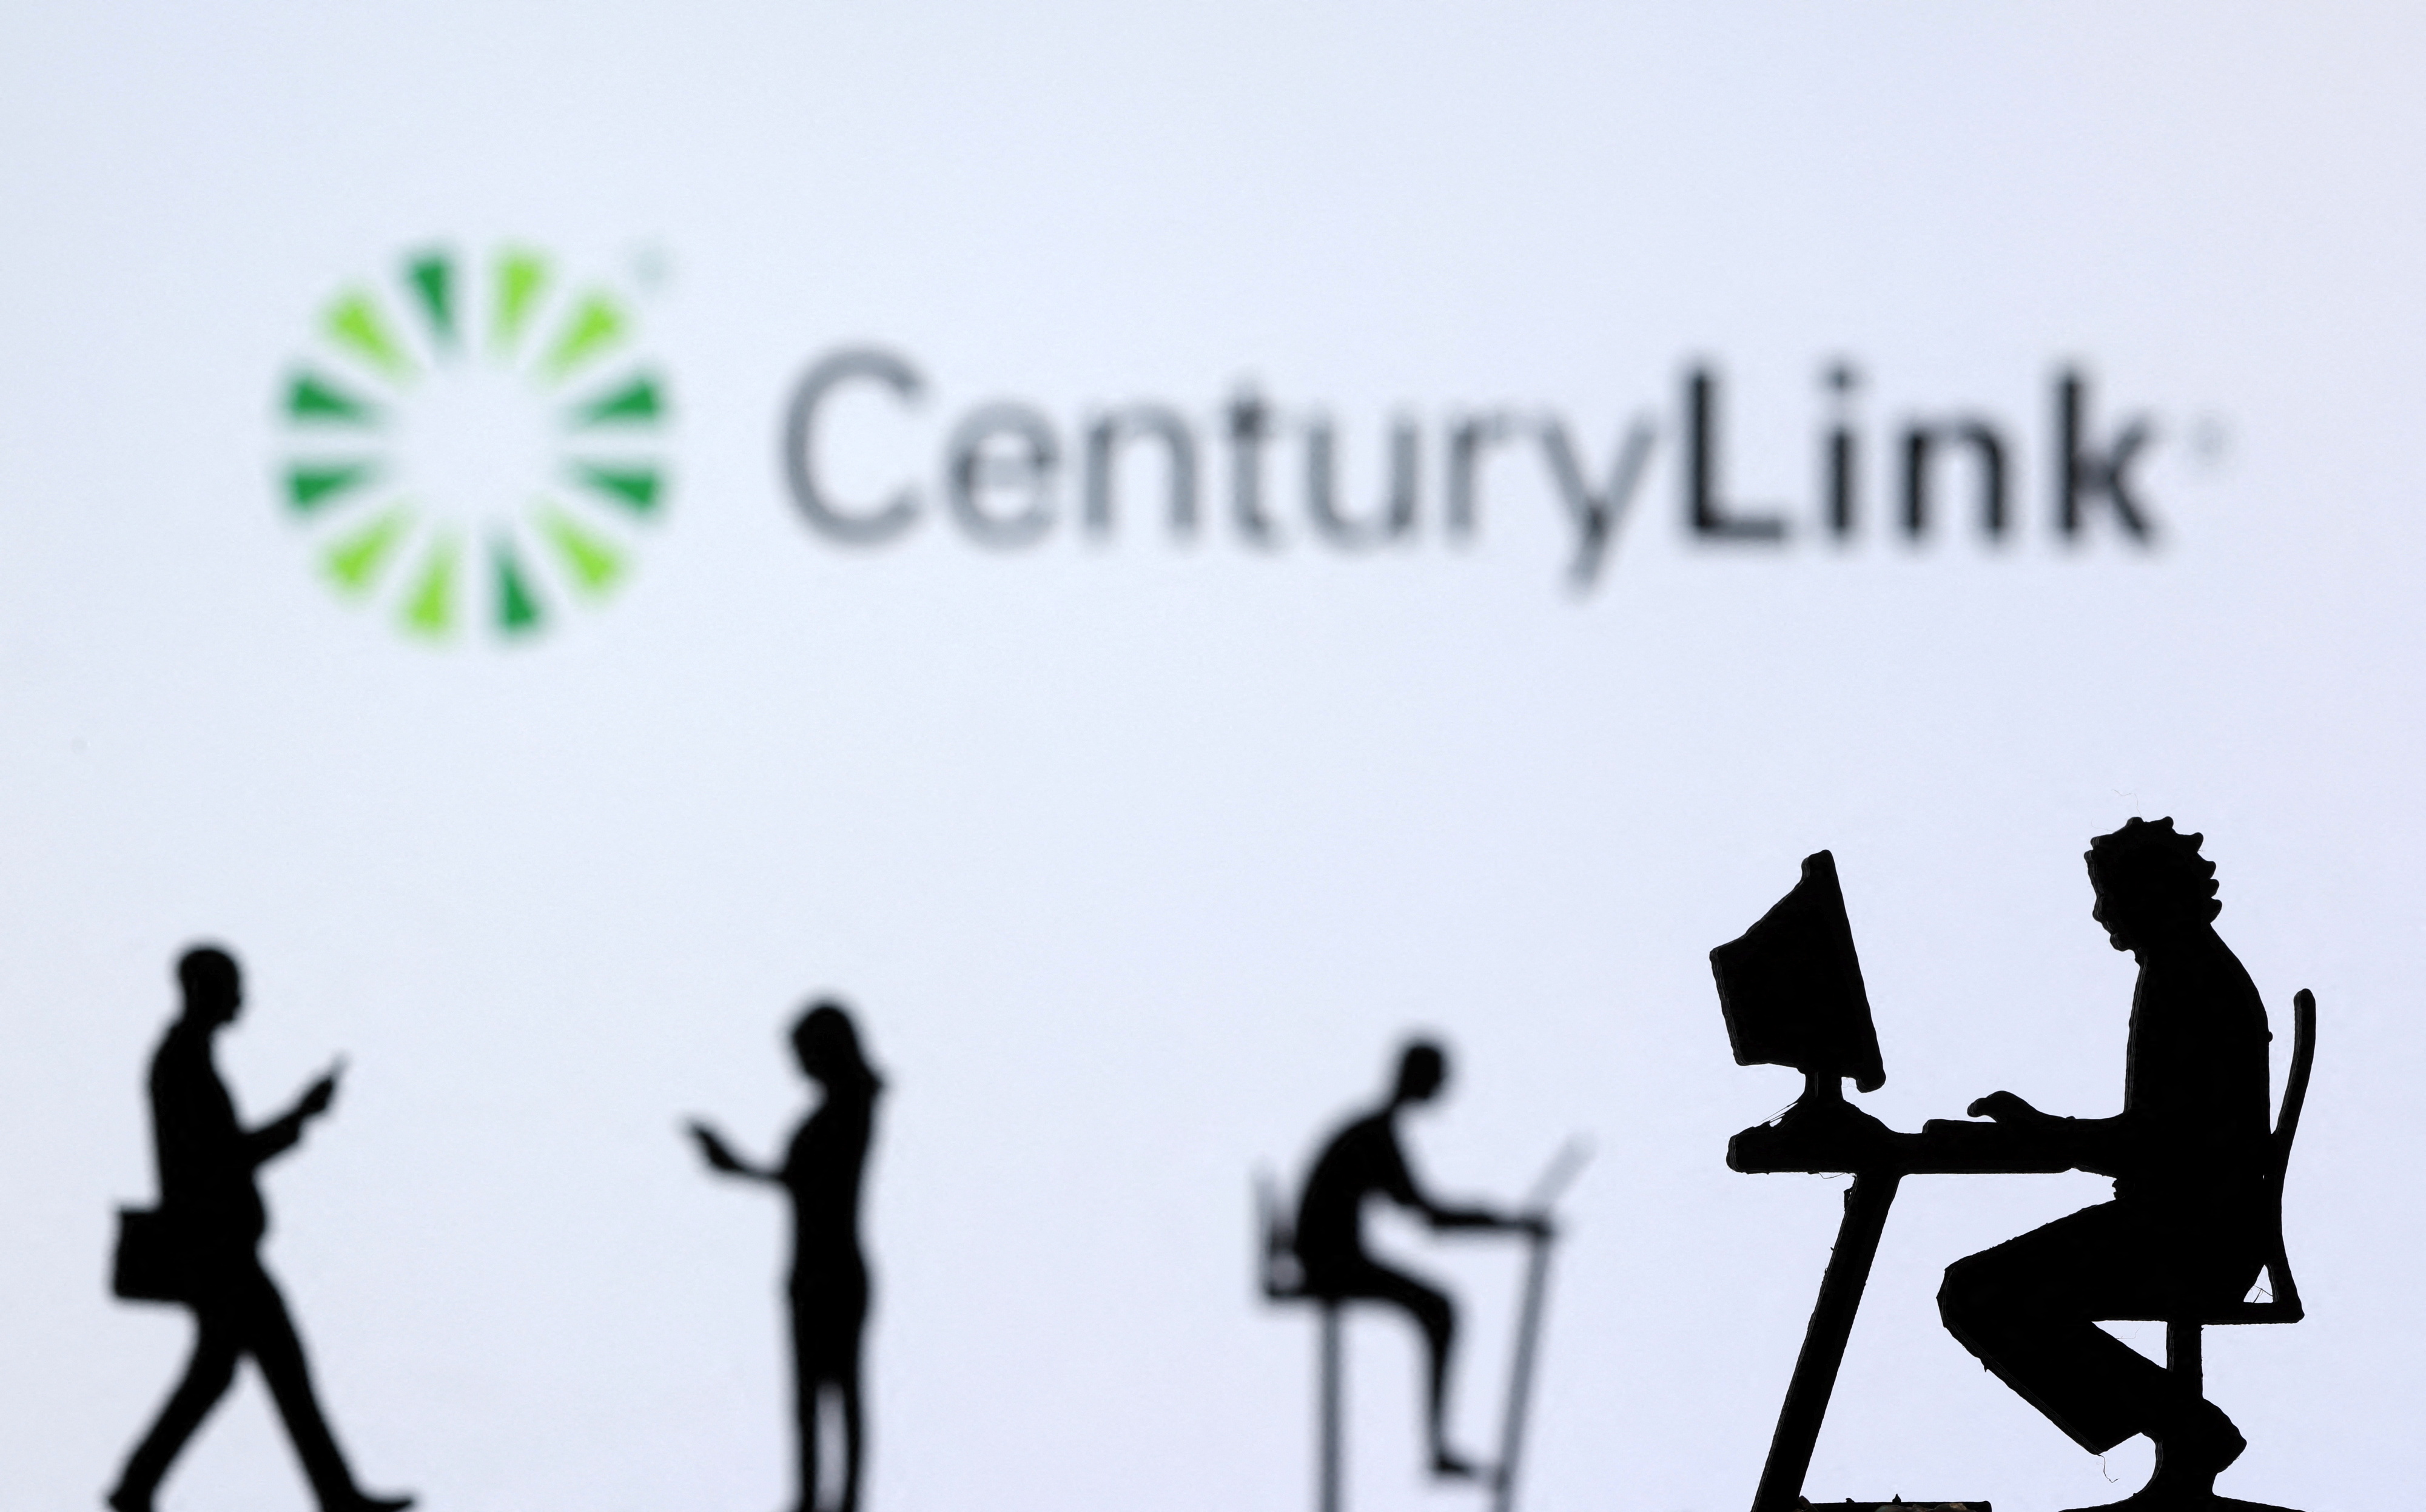 Illustration shows small toy figures with laptops and smartphones in front of displayed CenturyLink Internet logo